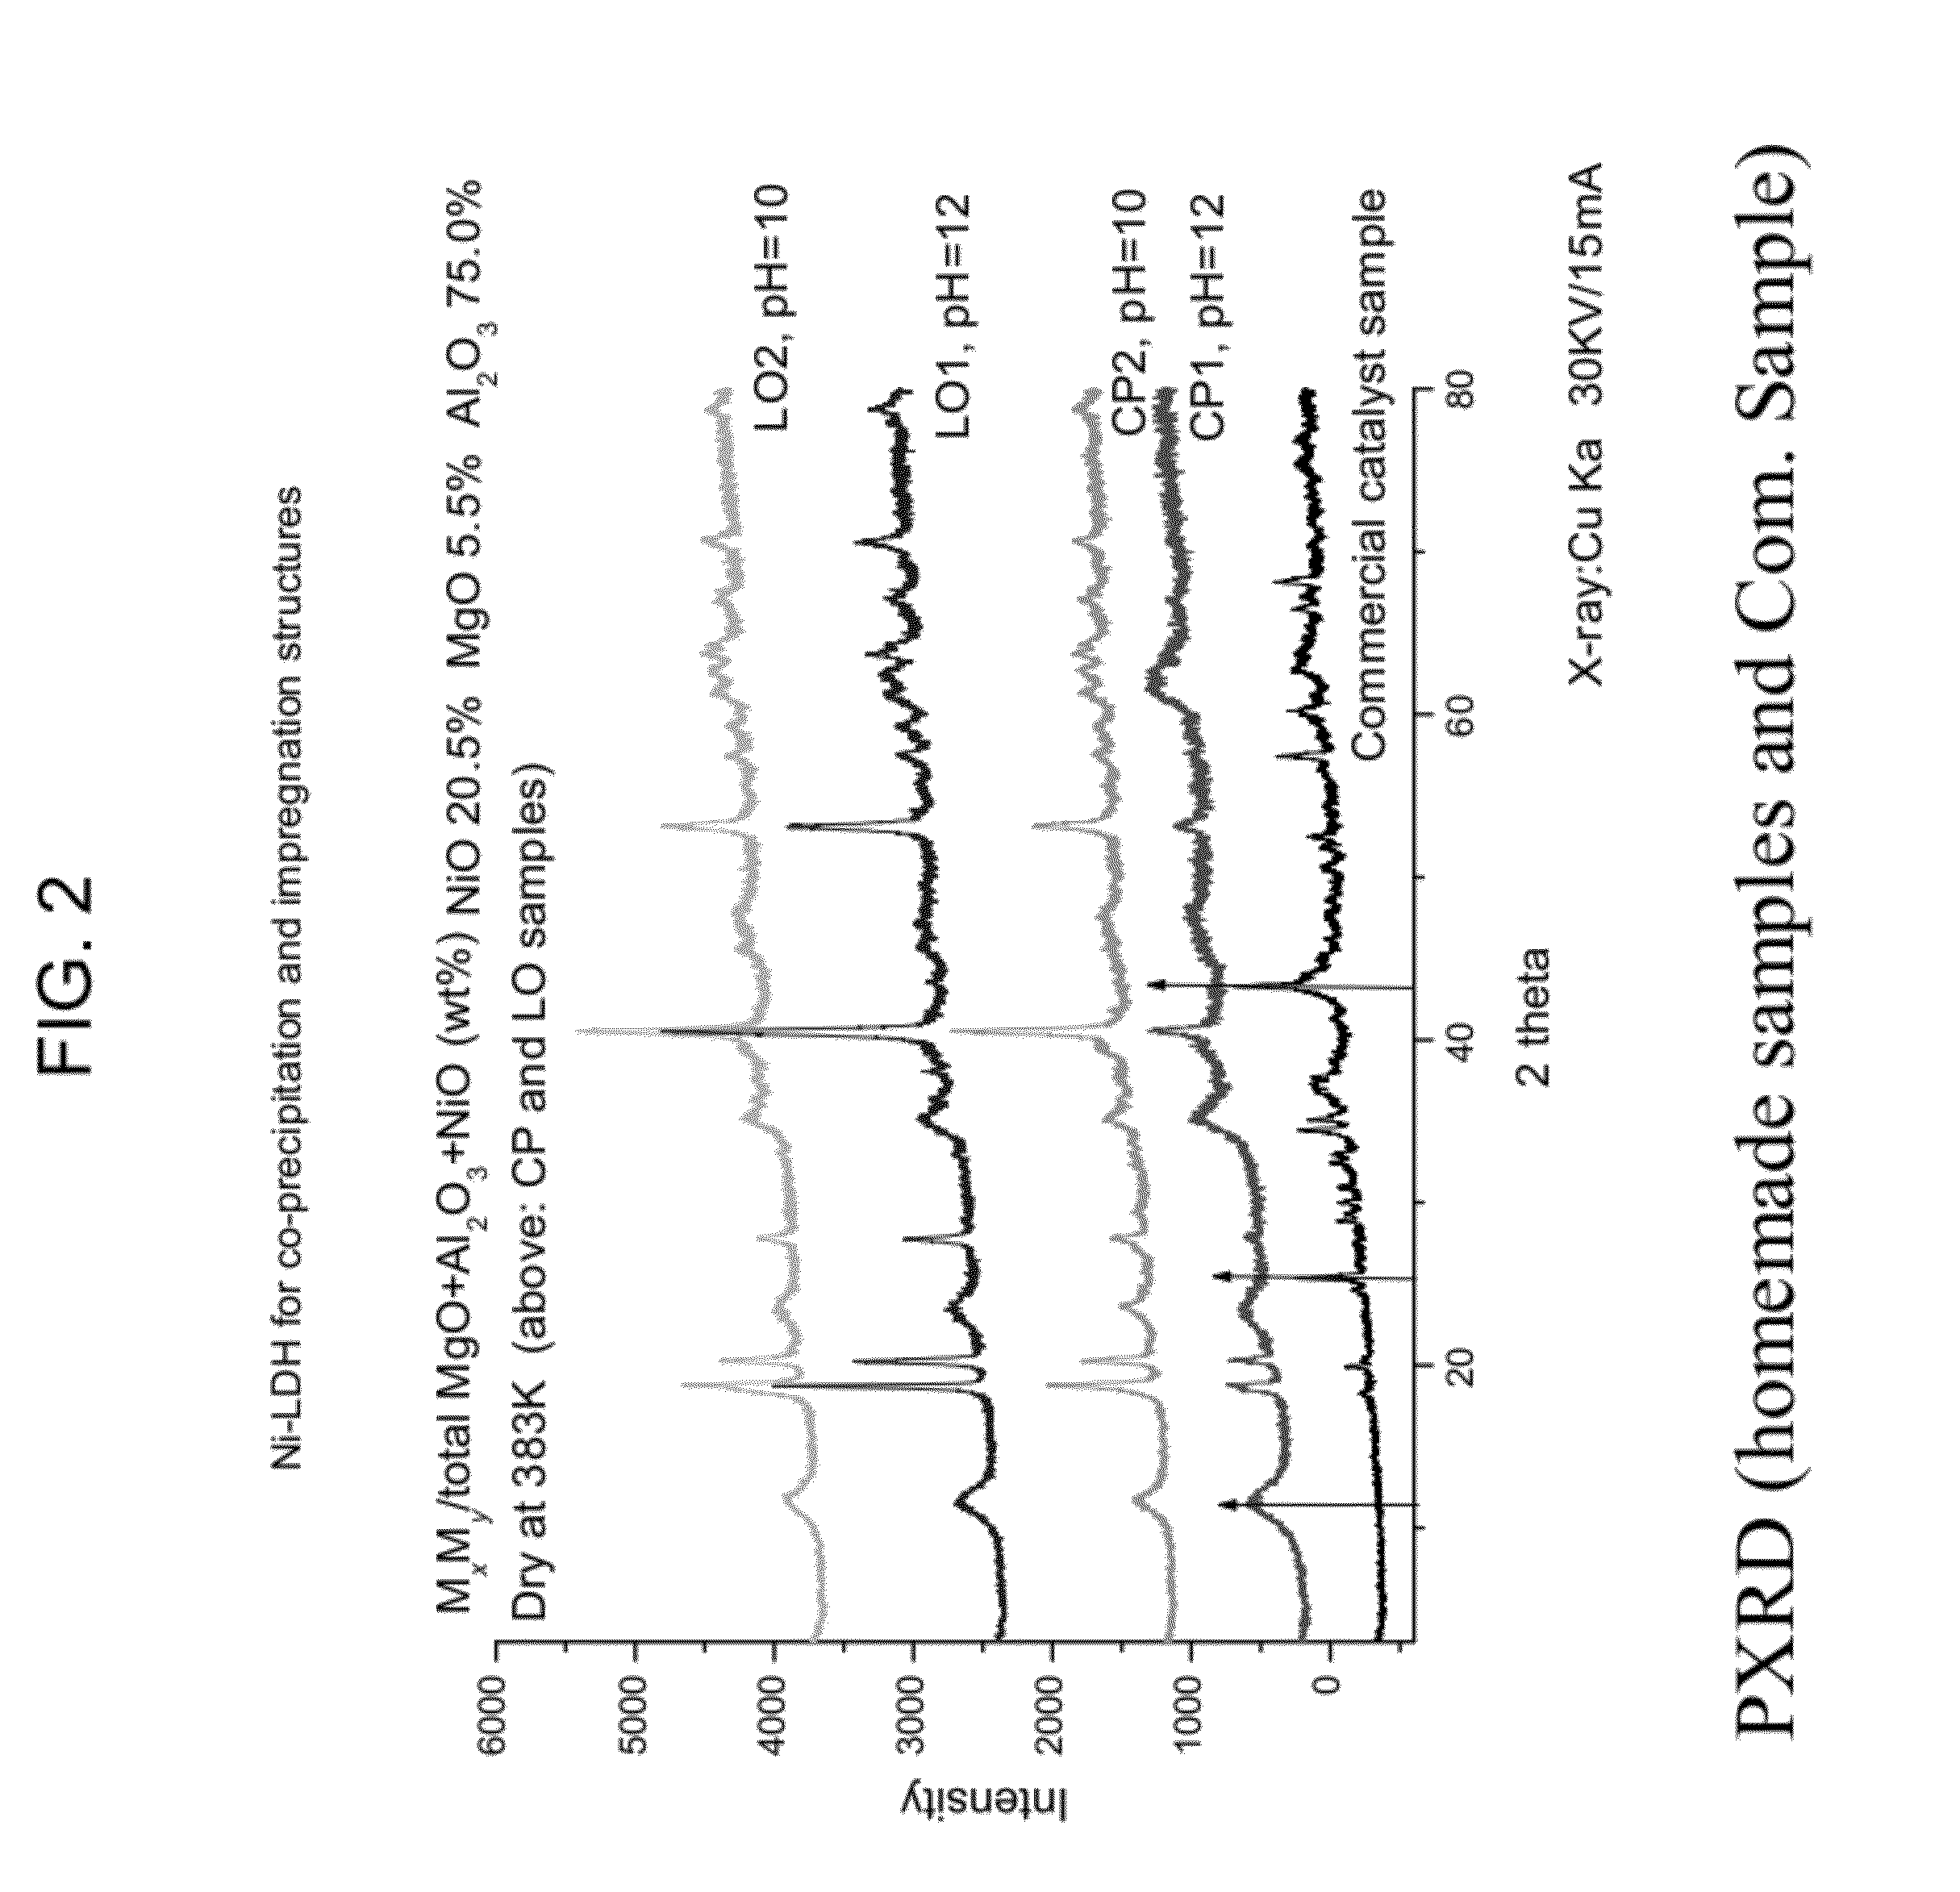 Metal supported silica based catalytic membrane reactor assembly